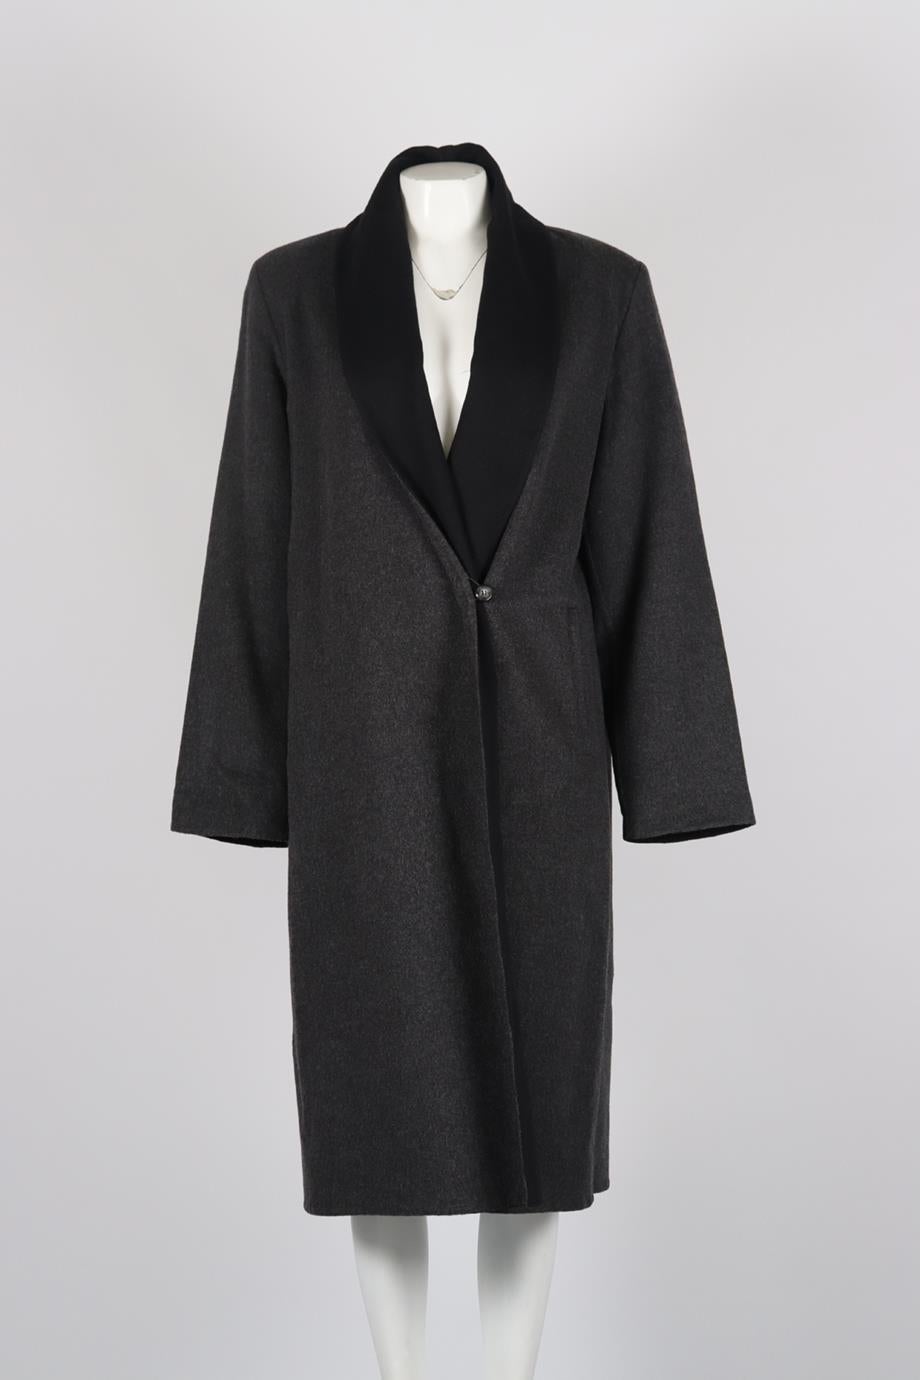 Marina Rinaldi Wool And Angora Blend Coat. Black and grey. Long Sleeve. V-Neck. Button fastening - Front. 80% Wool, 20% angora. 23 (UK 18, US 14, FR 46, IT 50). Bust: 50 in. Waist: 50 in. Hips: 52 in. Length: 43.5 in. Condition: Used. Very good